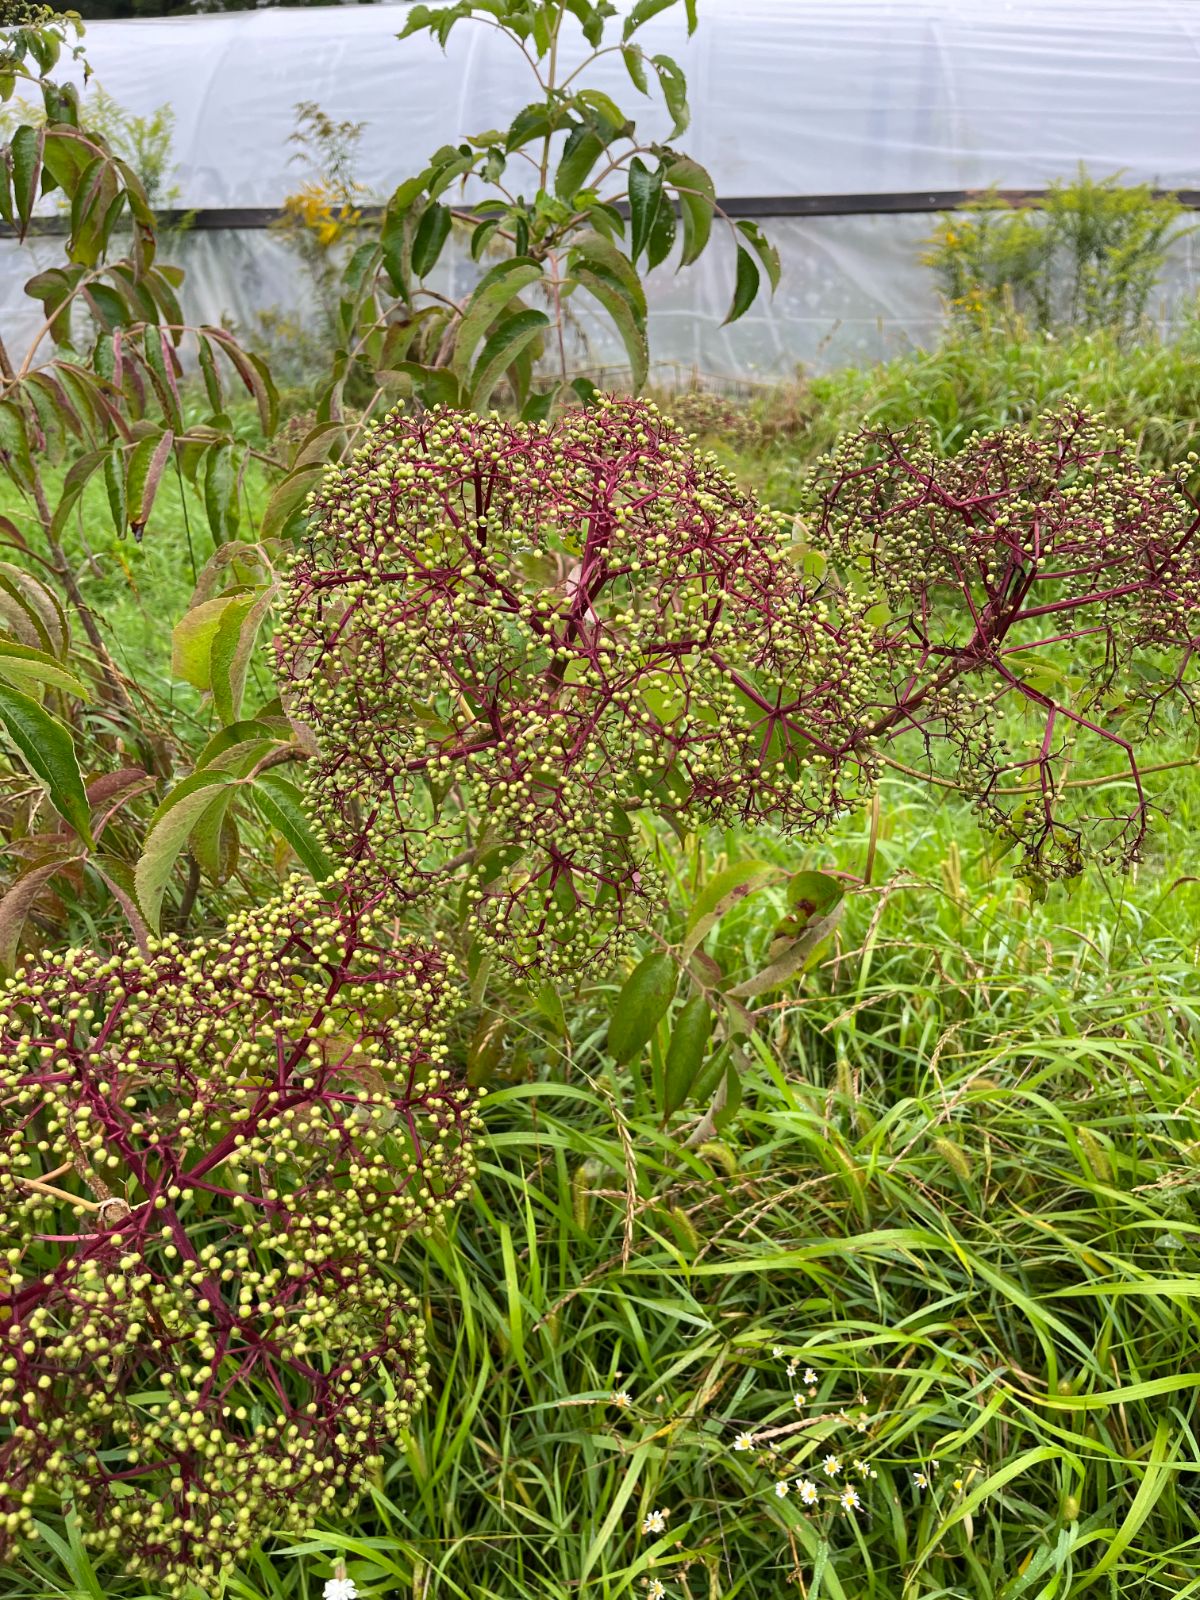 An elderberry with berries in uniform stages of ripening